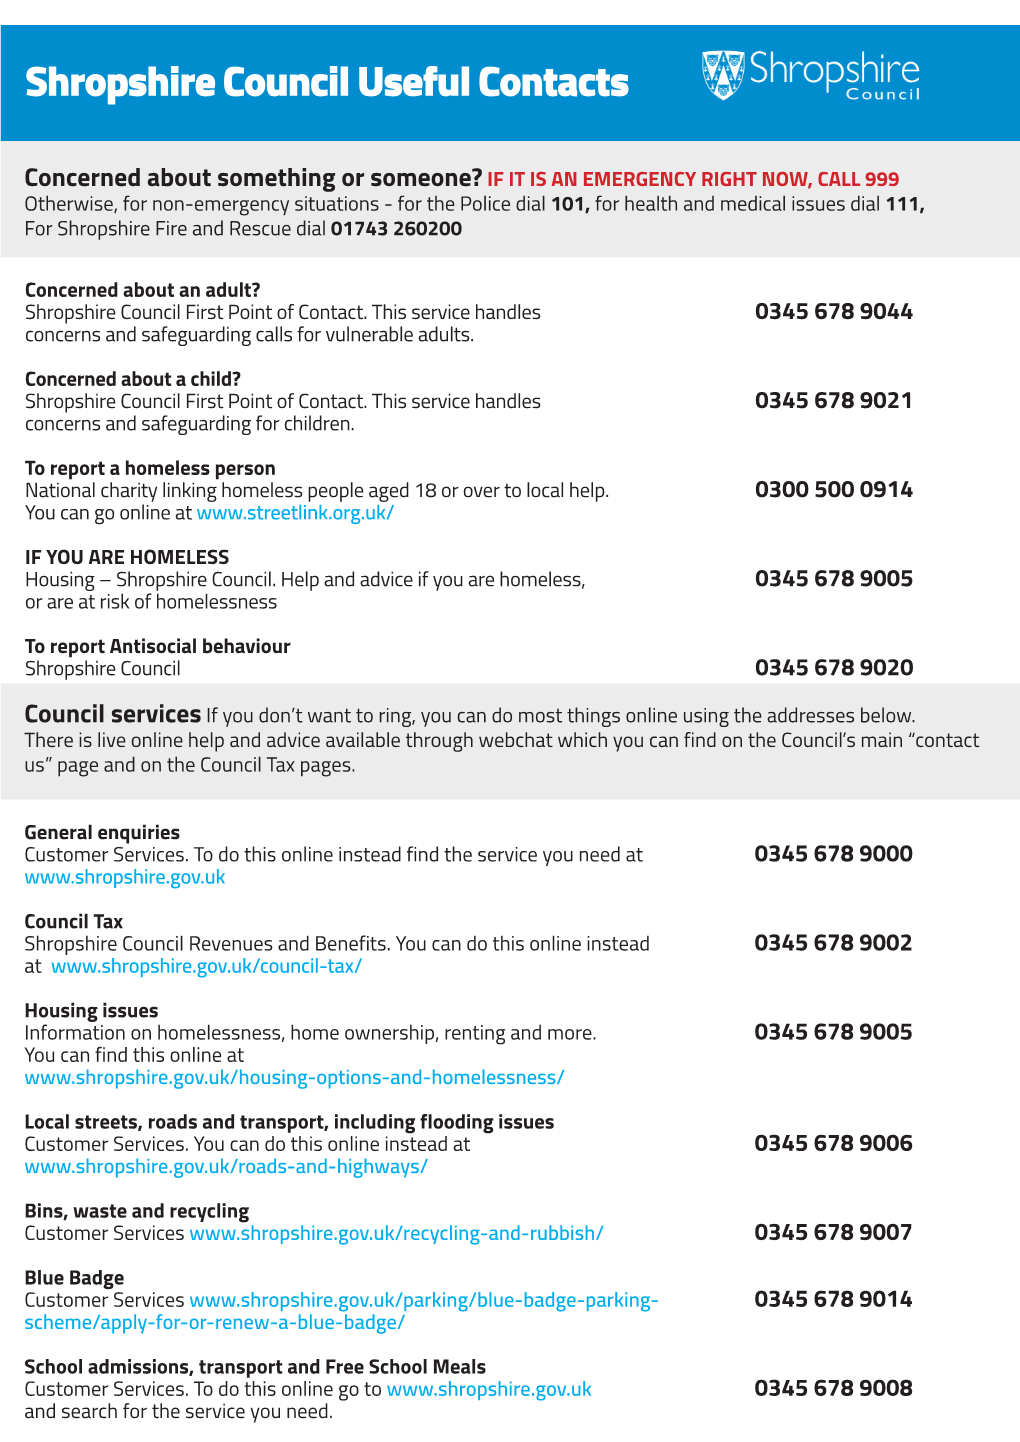 Shropshire Council Useful Contacts